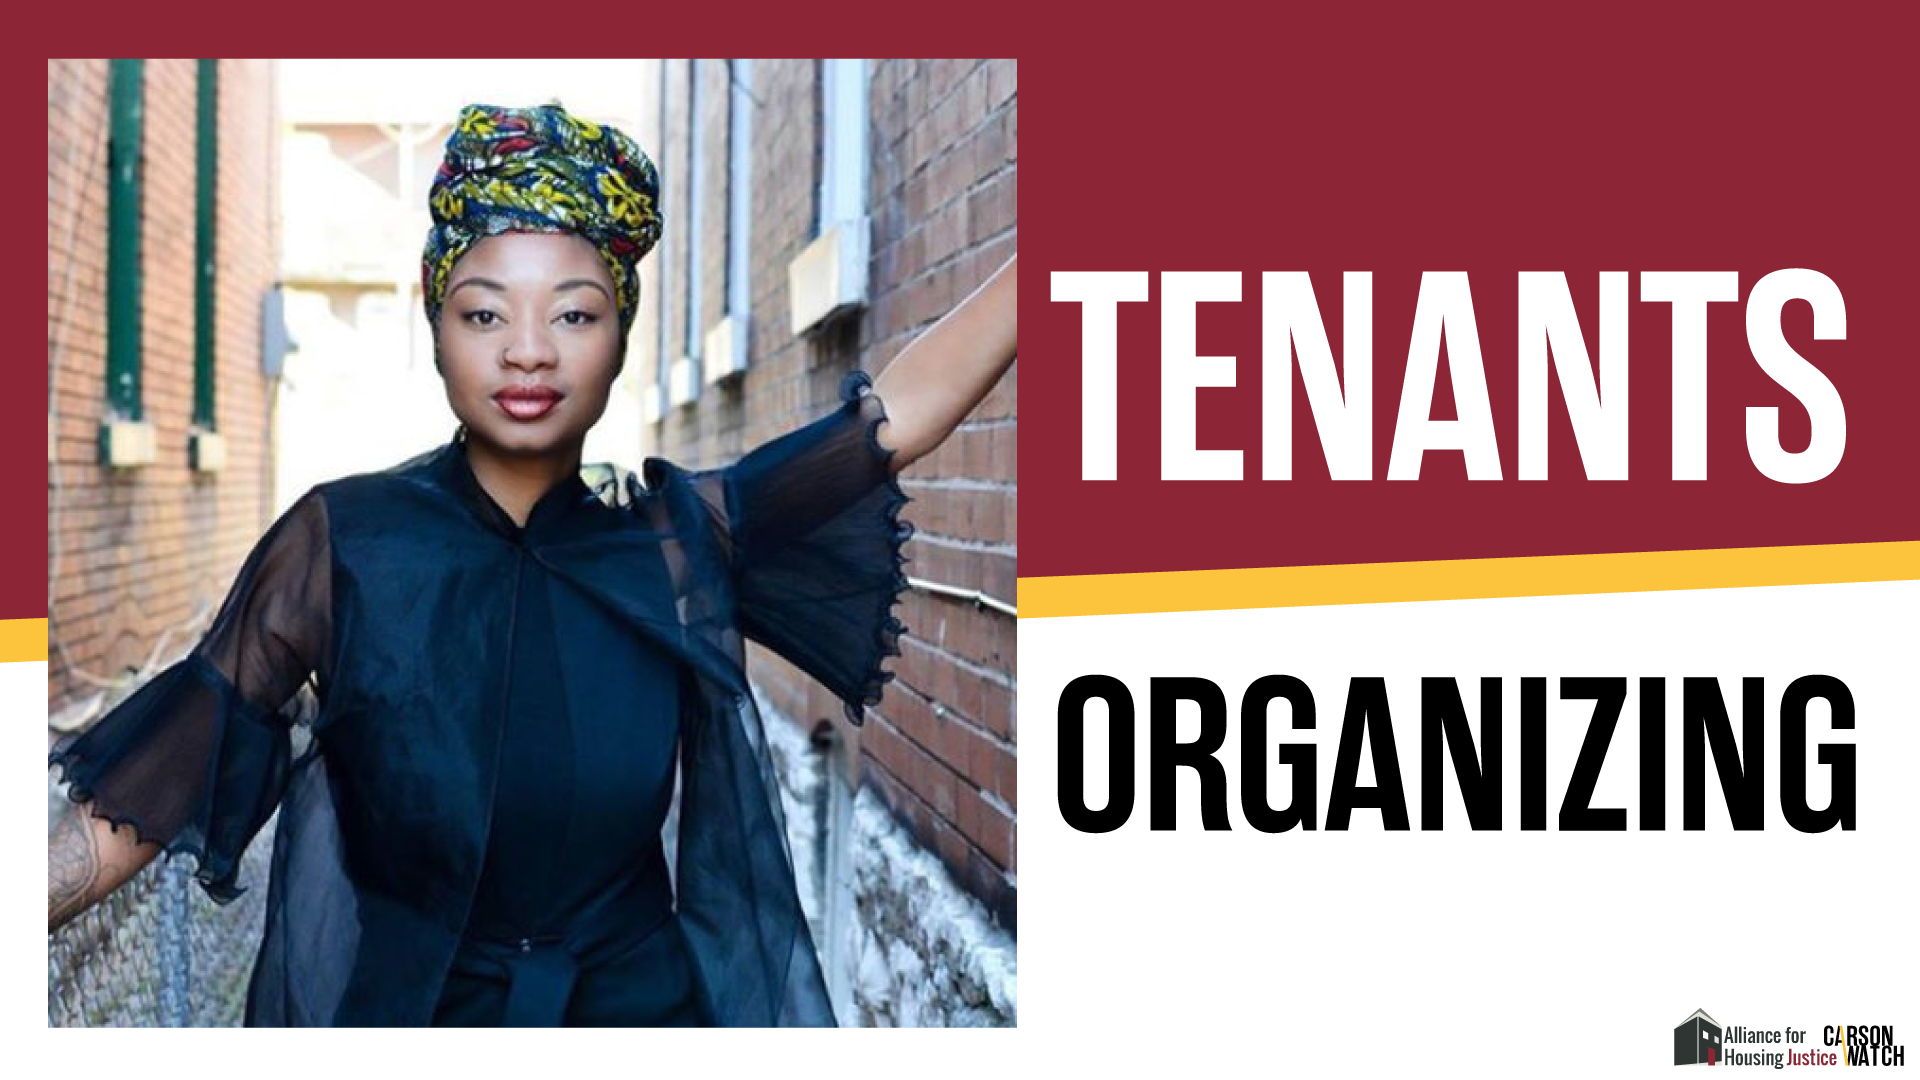 It is time for tenant organizing in St. Louis